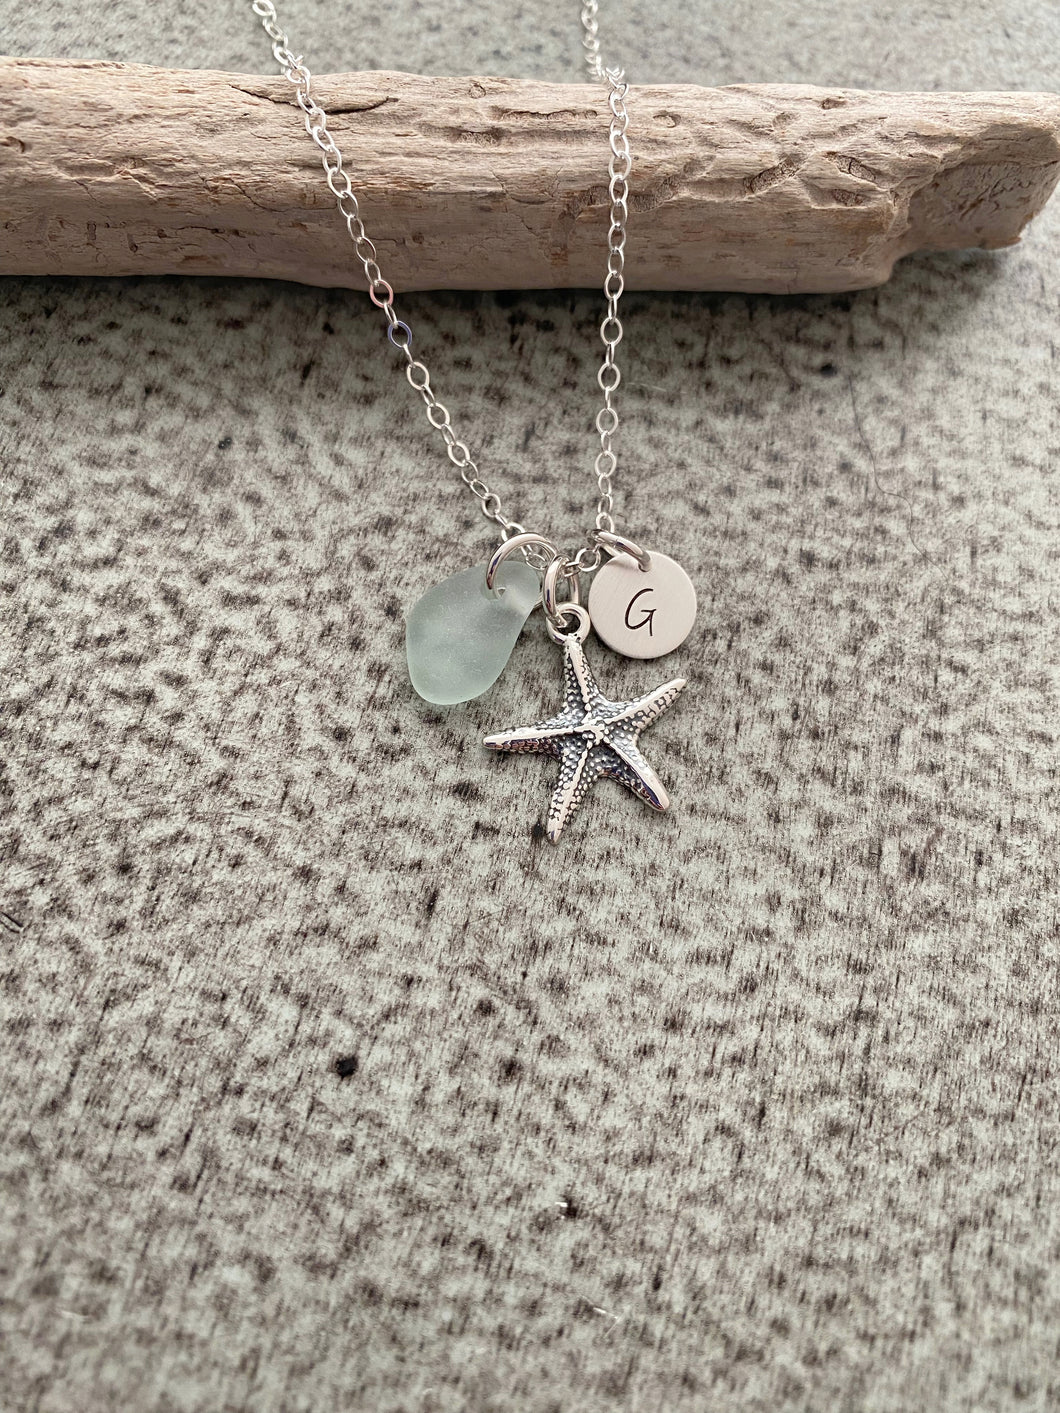 Personalized Charm Necklace with Sterling Silver Starfish Sea Glass and Initial Charm Made to Order Wedding Bridesmaid Gift, Seafoam, Mint